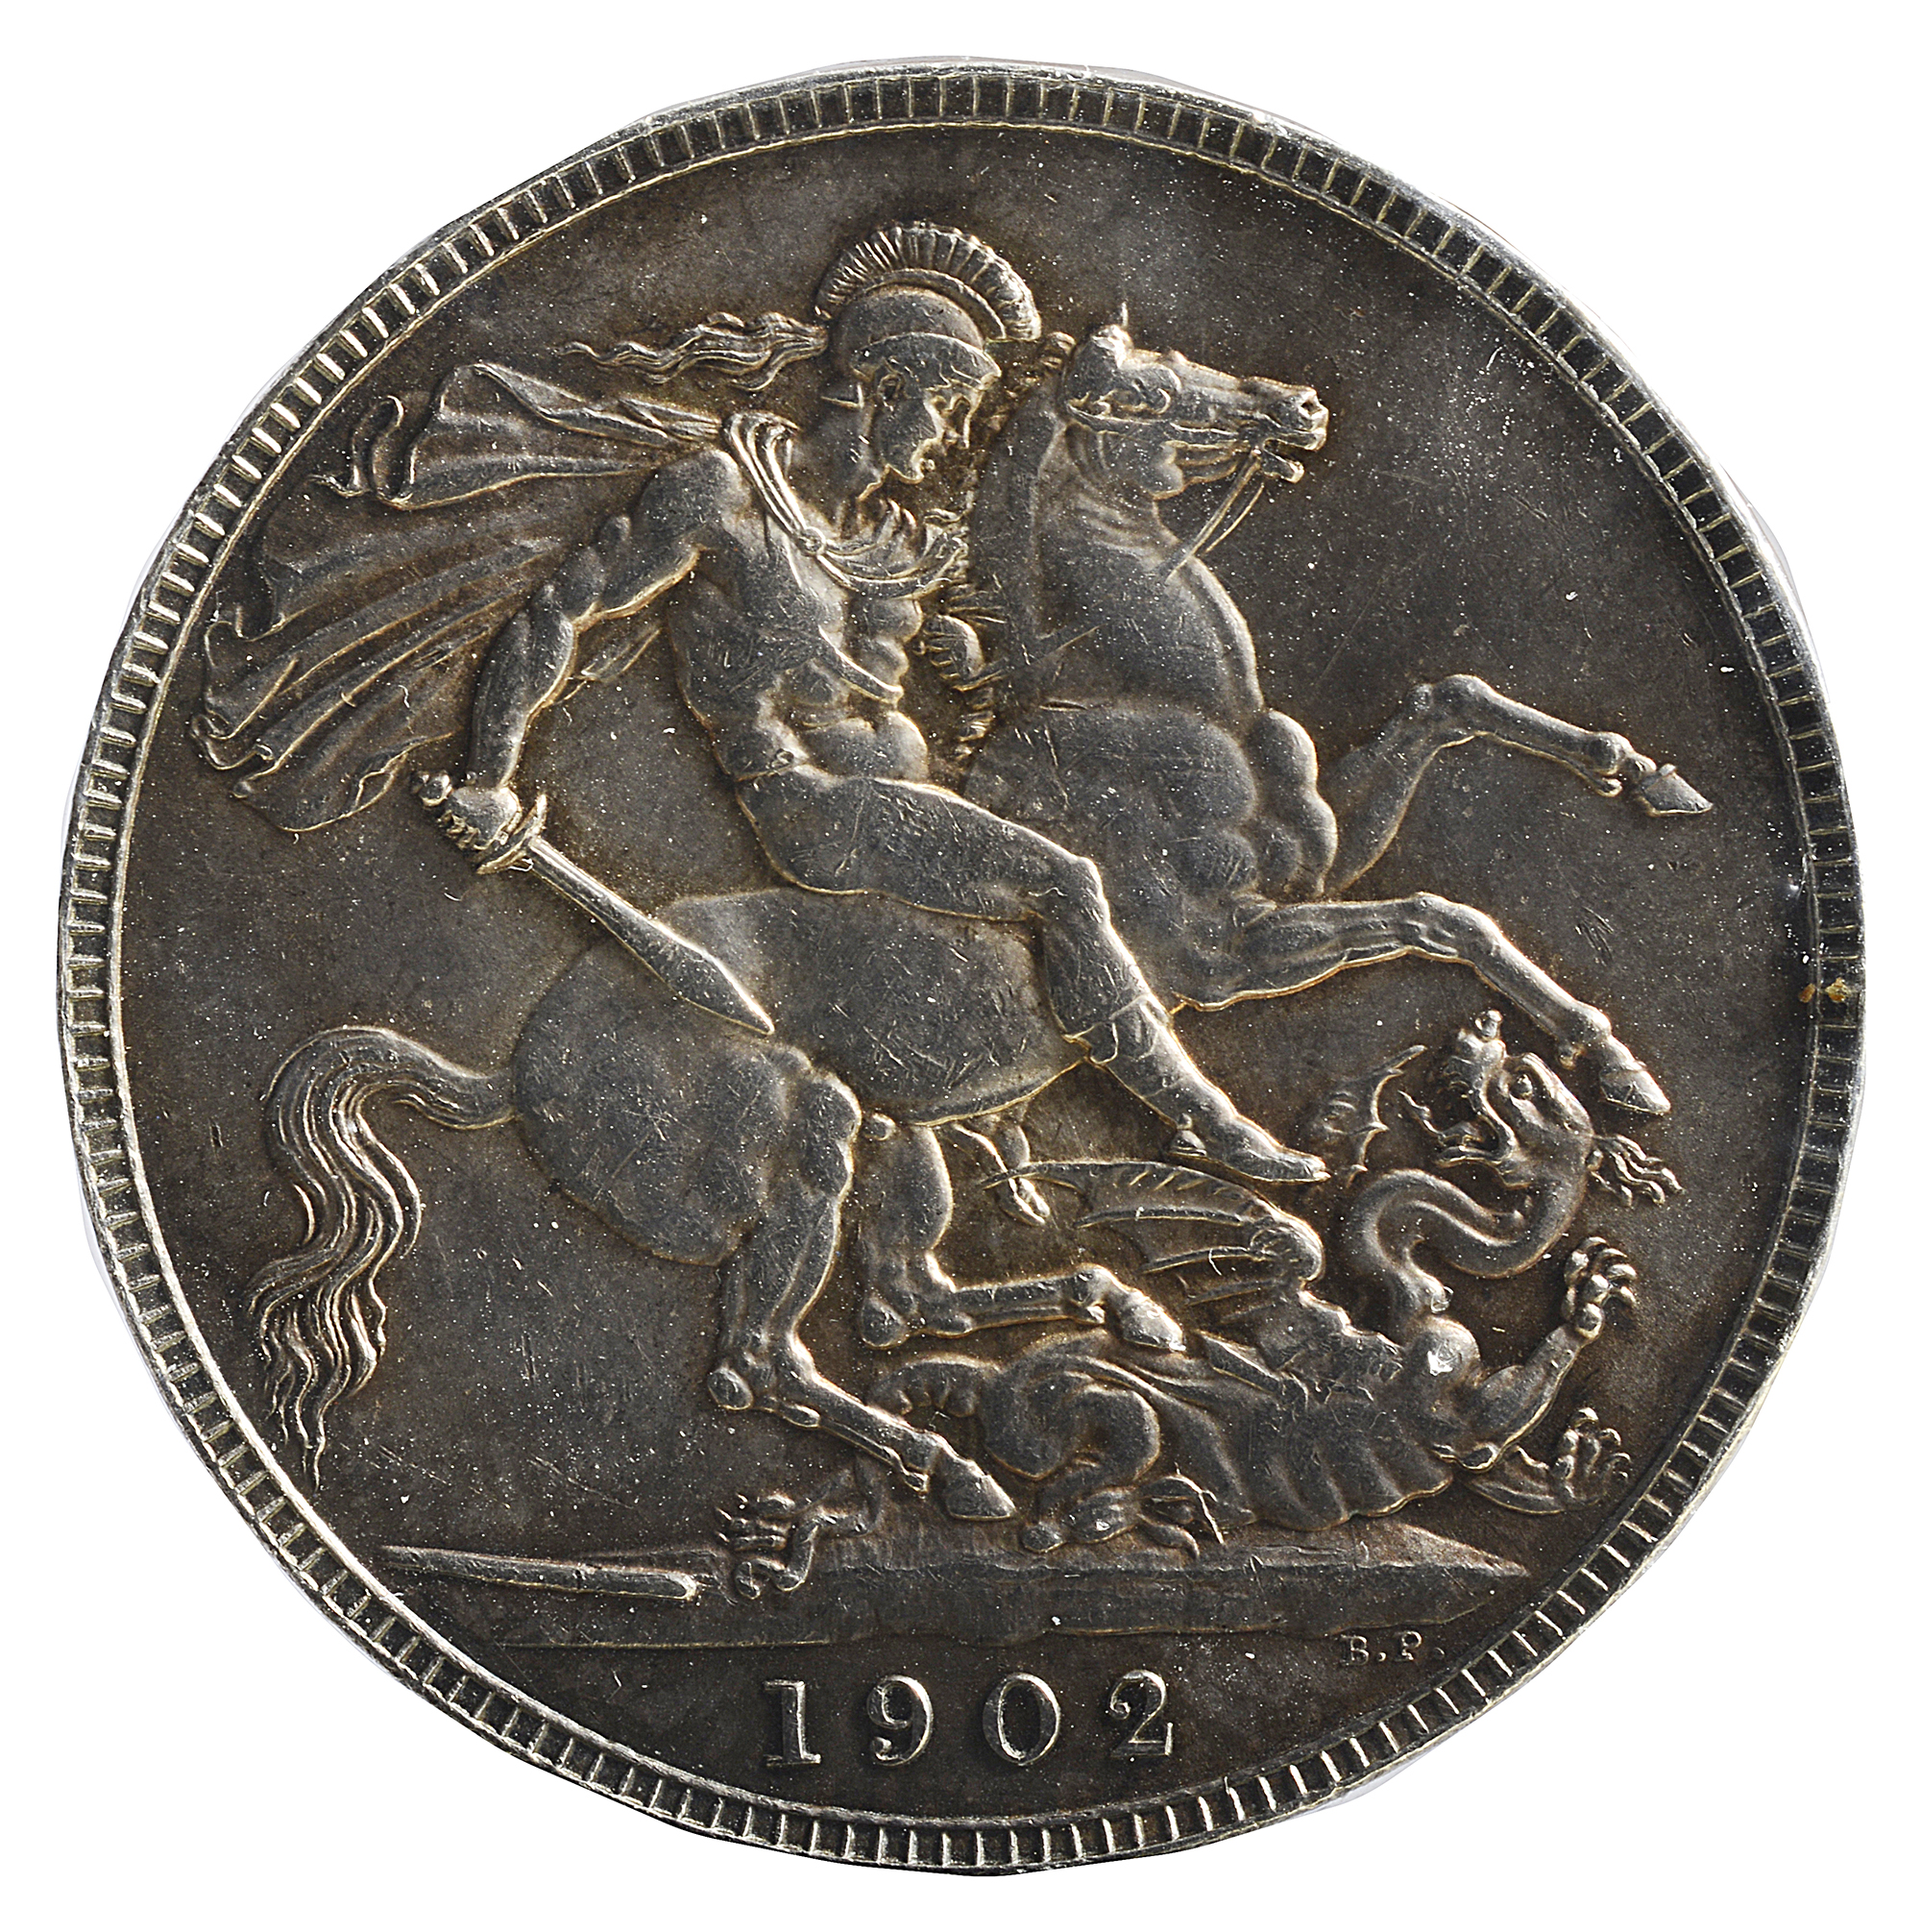 Edward VII Silver Crown1902Bare head, right / St. George slaying a dragon, date in exergue. - Image 2 of 2